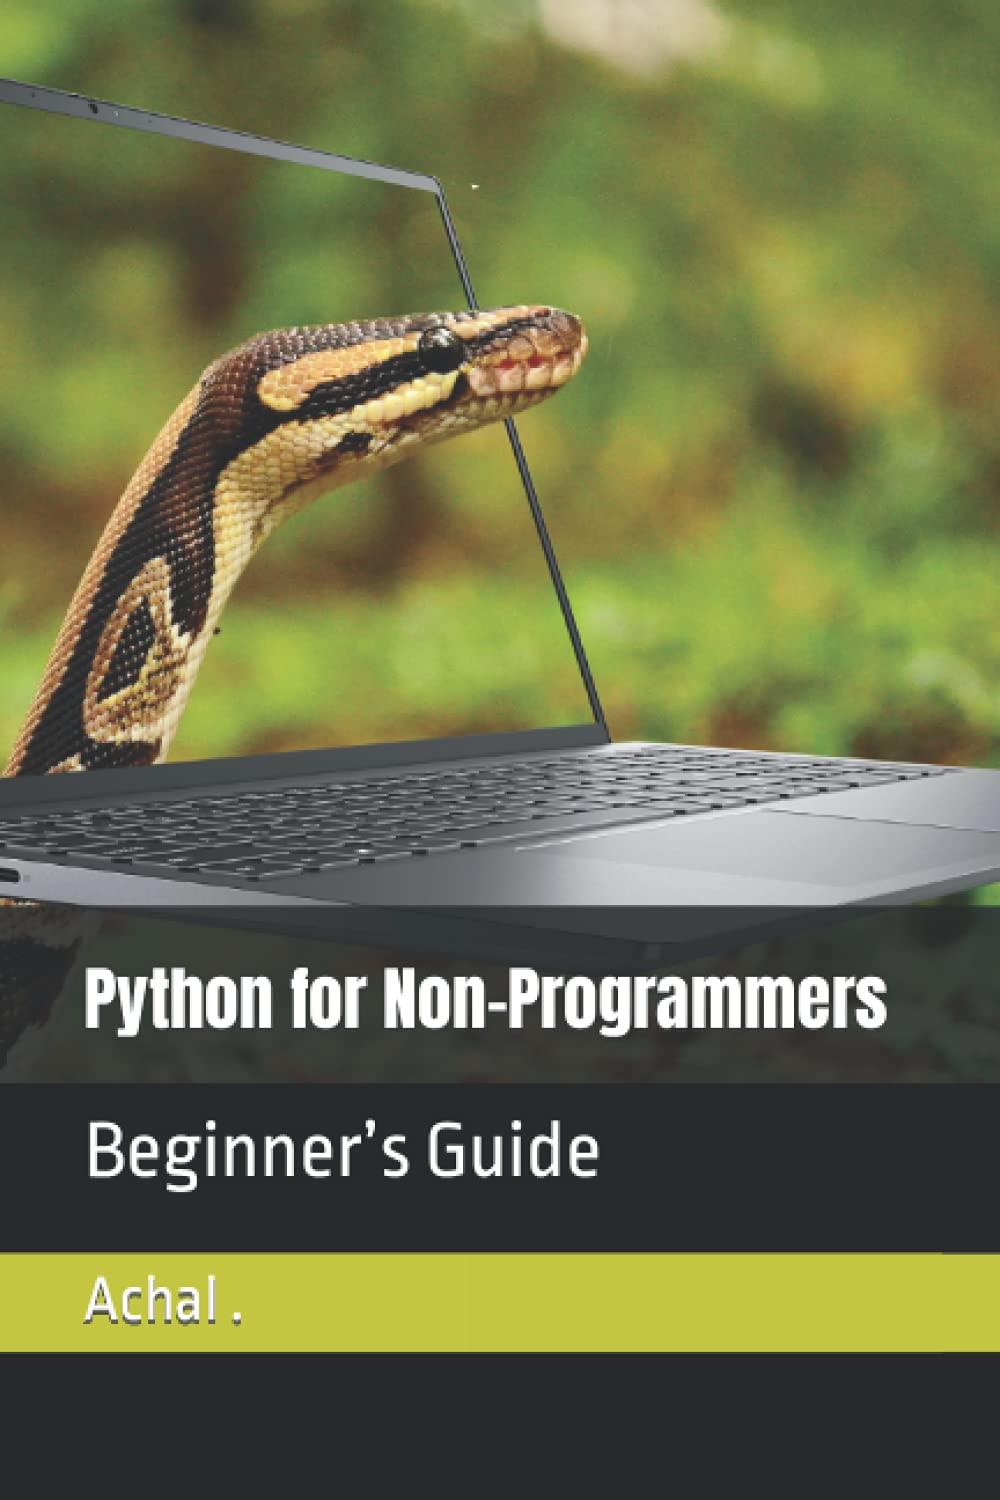 python for non programmers beginner’s guide 1st edition achal b09fs12rt9, 979-8474799292